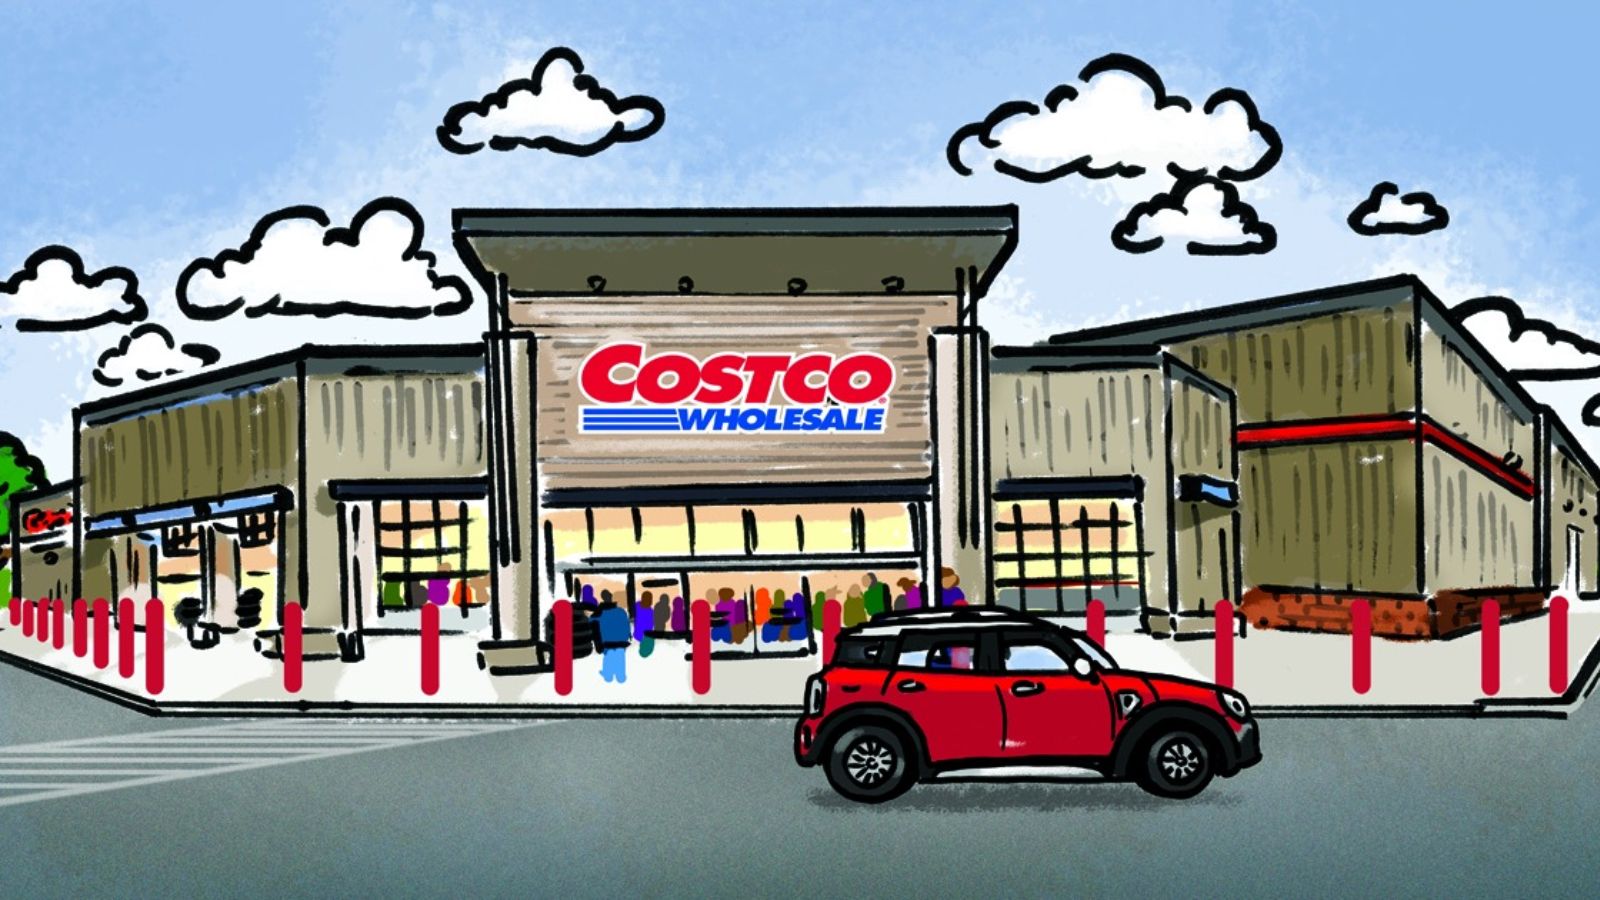 Costco Get 75 in Costco Cash by purchasing 500+ online (select items